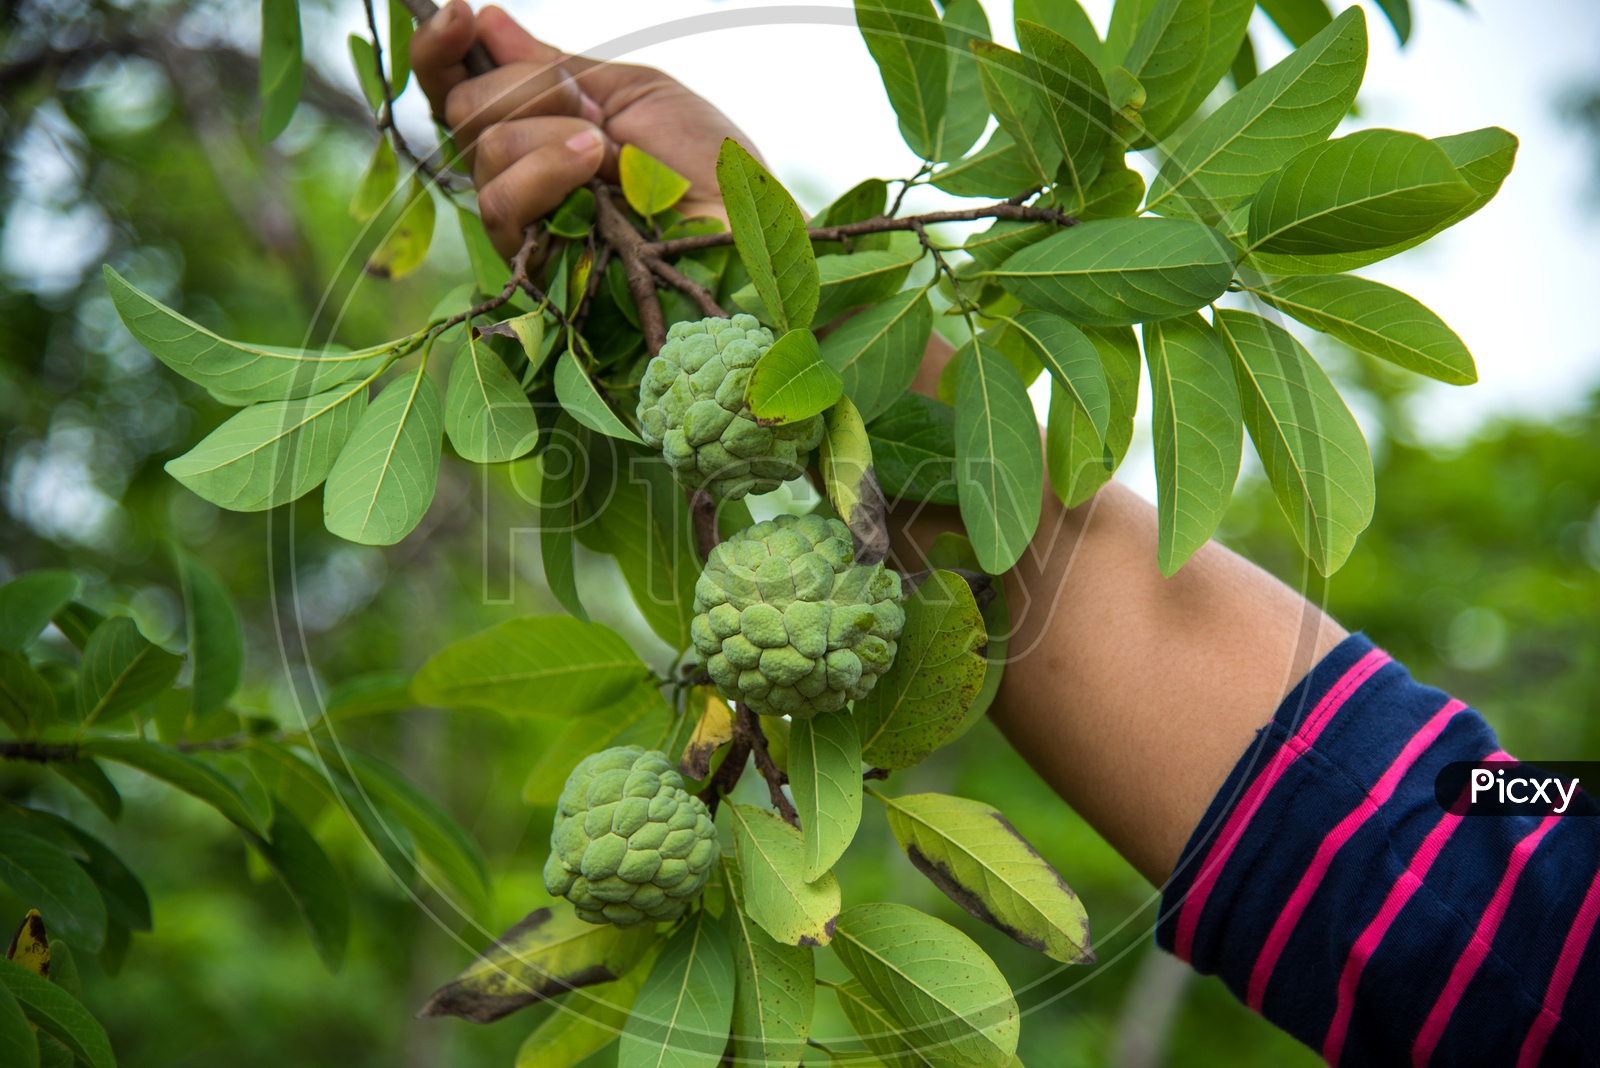 A Young Girl Or Agricultural Student  Examining The Custard Apple Or Sugar Apple Or Seethaphal  Or  Annona Squamosa Linn Fruit   Growing On the Tree In an Agricultural Farm